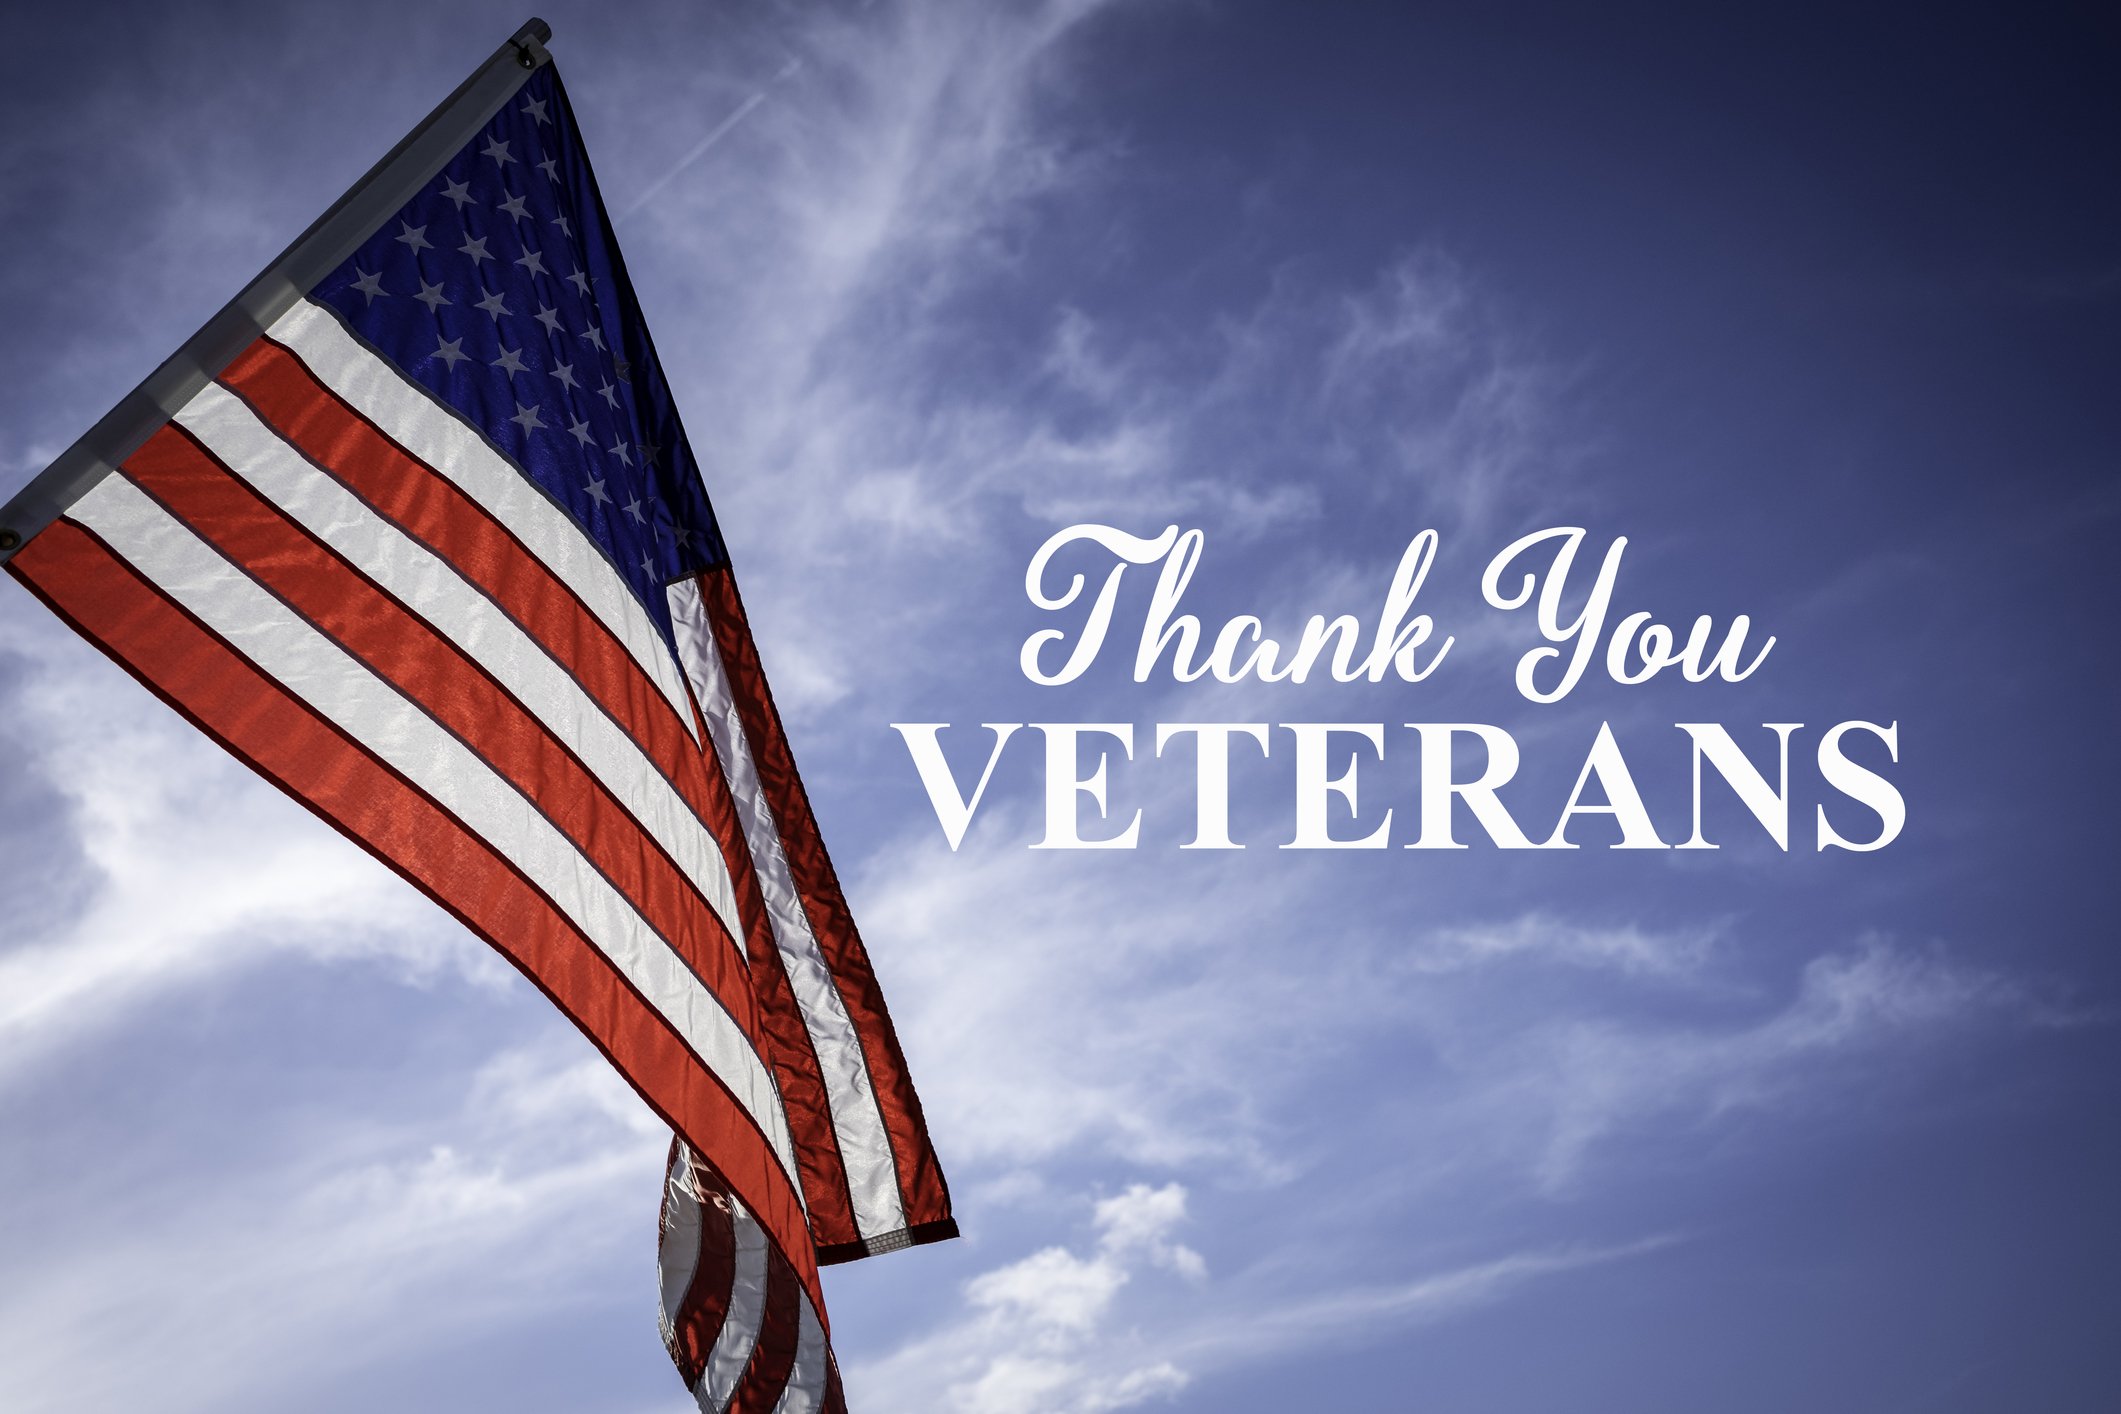 Veterans Day Thank You Images. 50+ Veterans Day Thank You Messages ...